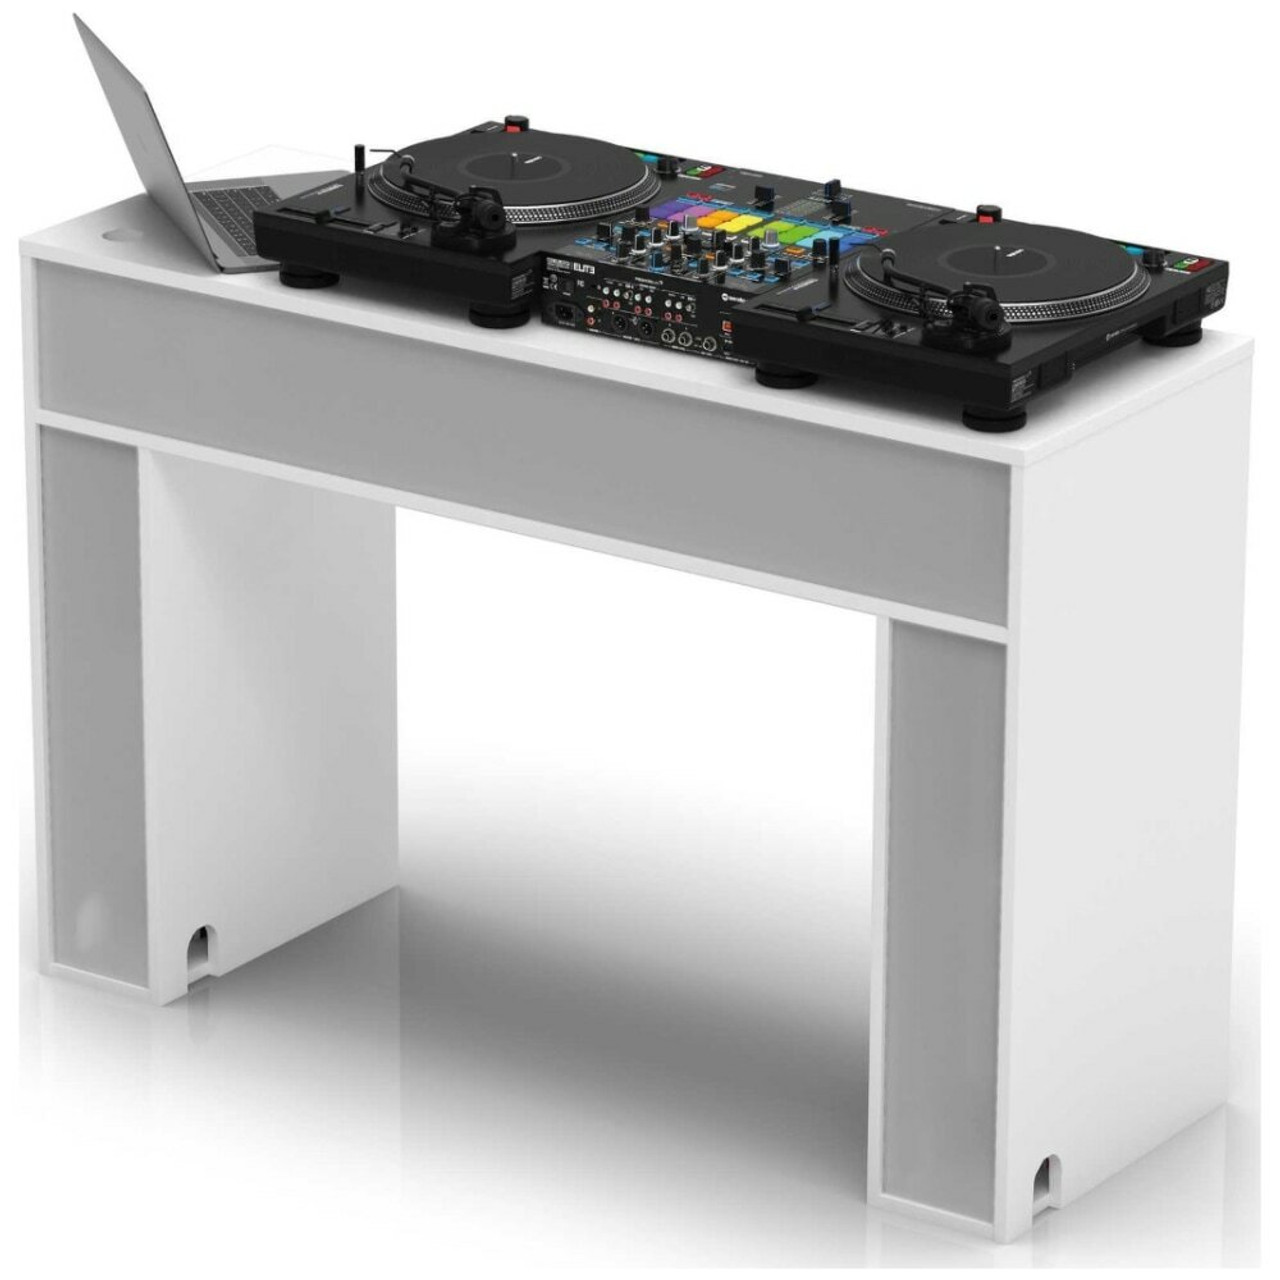 Glorious Record Rack 330 white / Furniture for DJs, Producers and